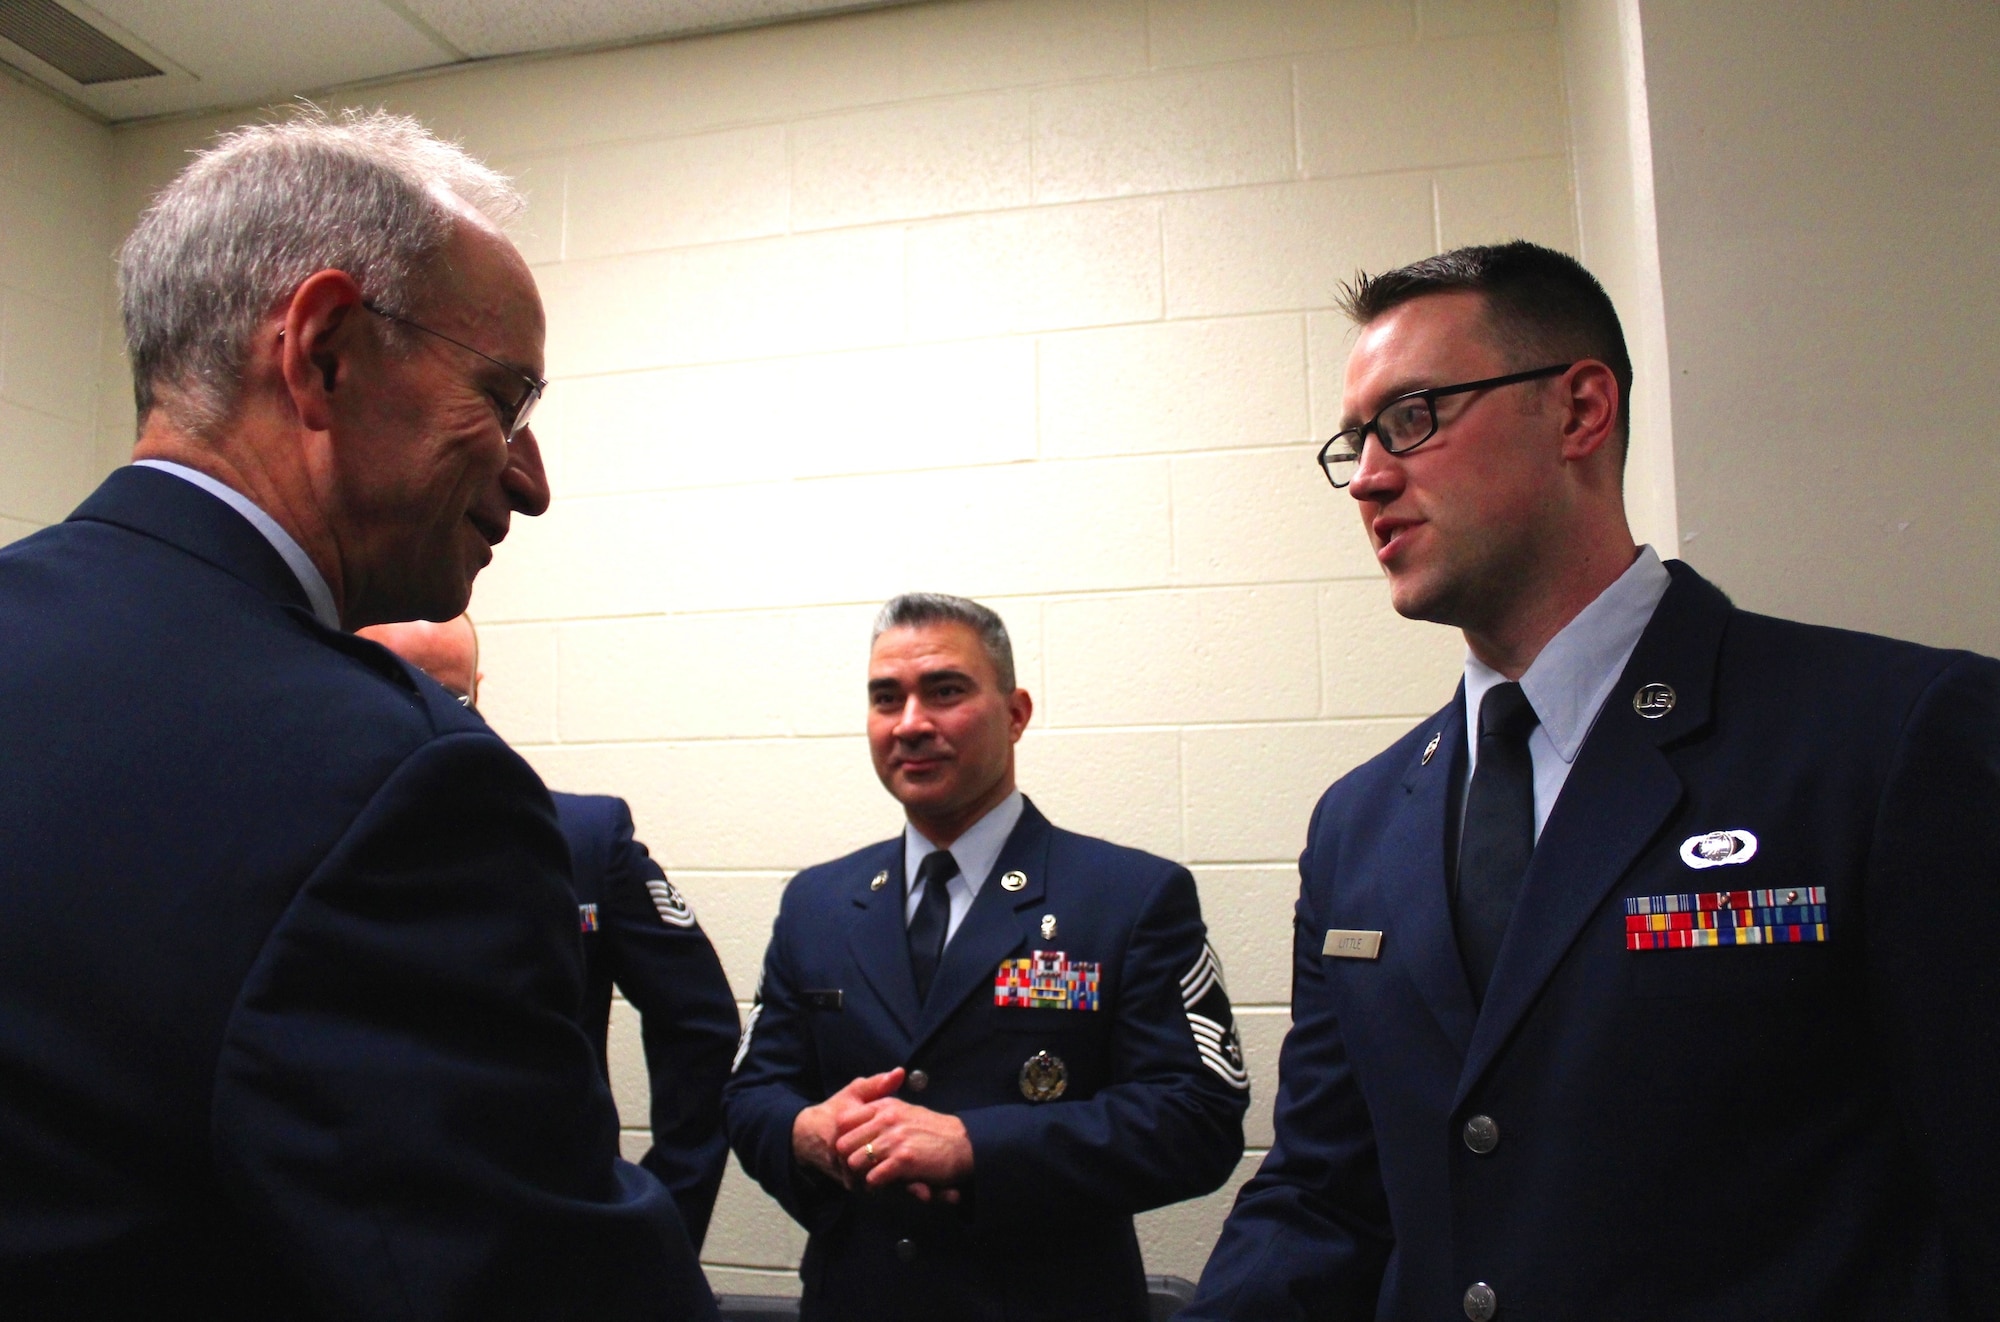 Air Force Surgeon General Lt. Gen. (Dr.) Mark Ediger (left) coins EMDP2 student Staff Sgt. Matt Little (right) during a backstage meeting prior to the commencement ceremony. The charter class of the Enlisted to Medical Degree Preparatory Program graduated on May 11, 2016 during a commencement ceremony held at George Mason University. The Enlisted to Medical Degree Preparatory Program is a partnership between the Armed Services and Uniformed Services University. Designed for enlisted service members, the two-year program enables members to remain on active duty status while enrolled as full-time students in preparation for application to medical school. (U.S. Air Force photo by Prerana Korpe, AFMS Public Affairs)